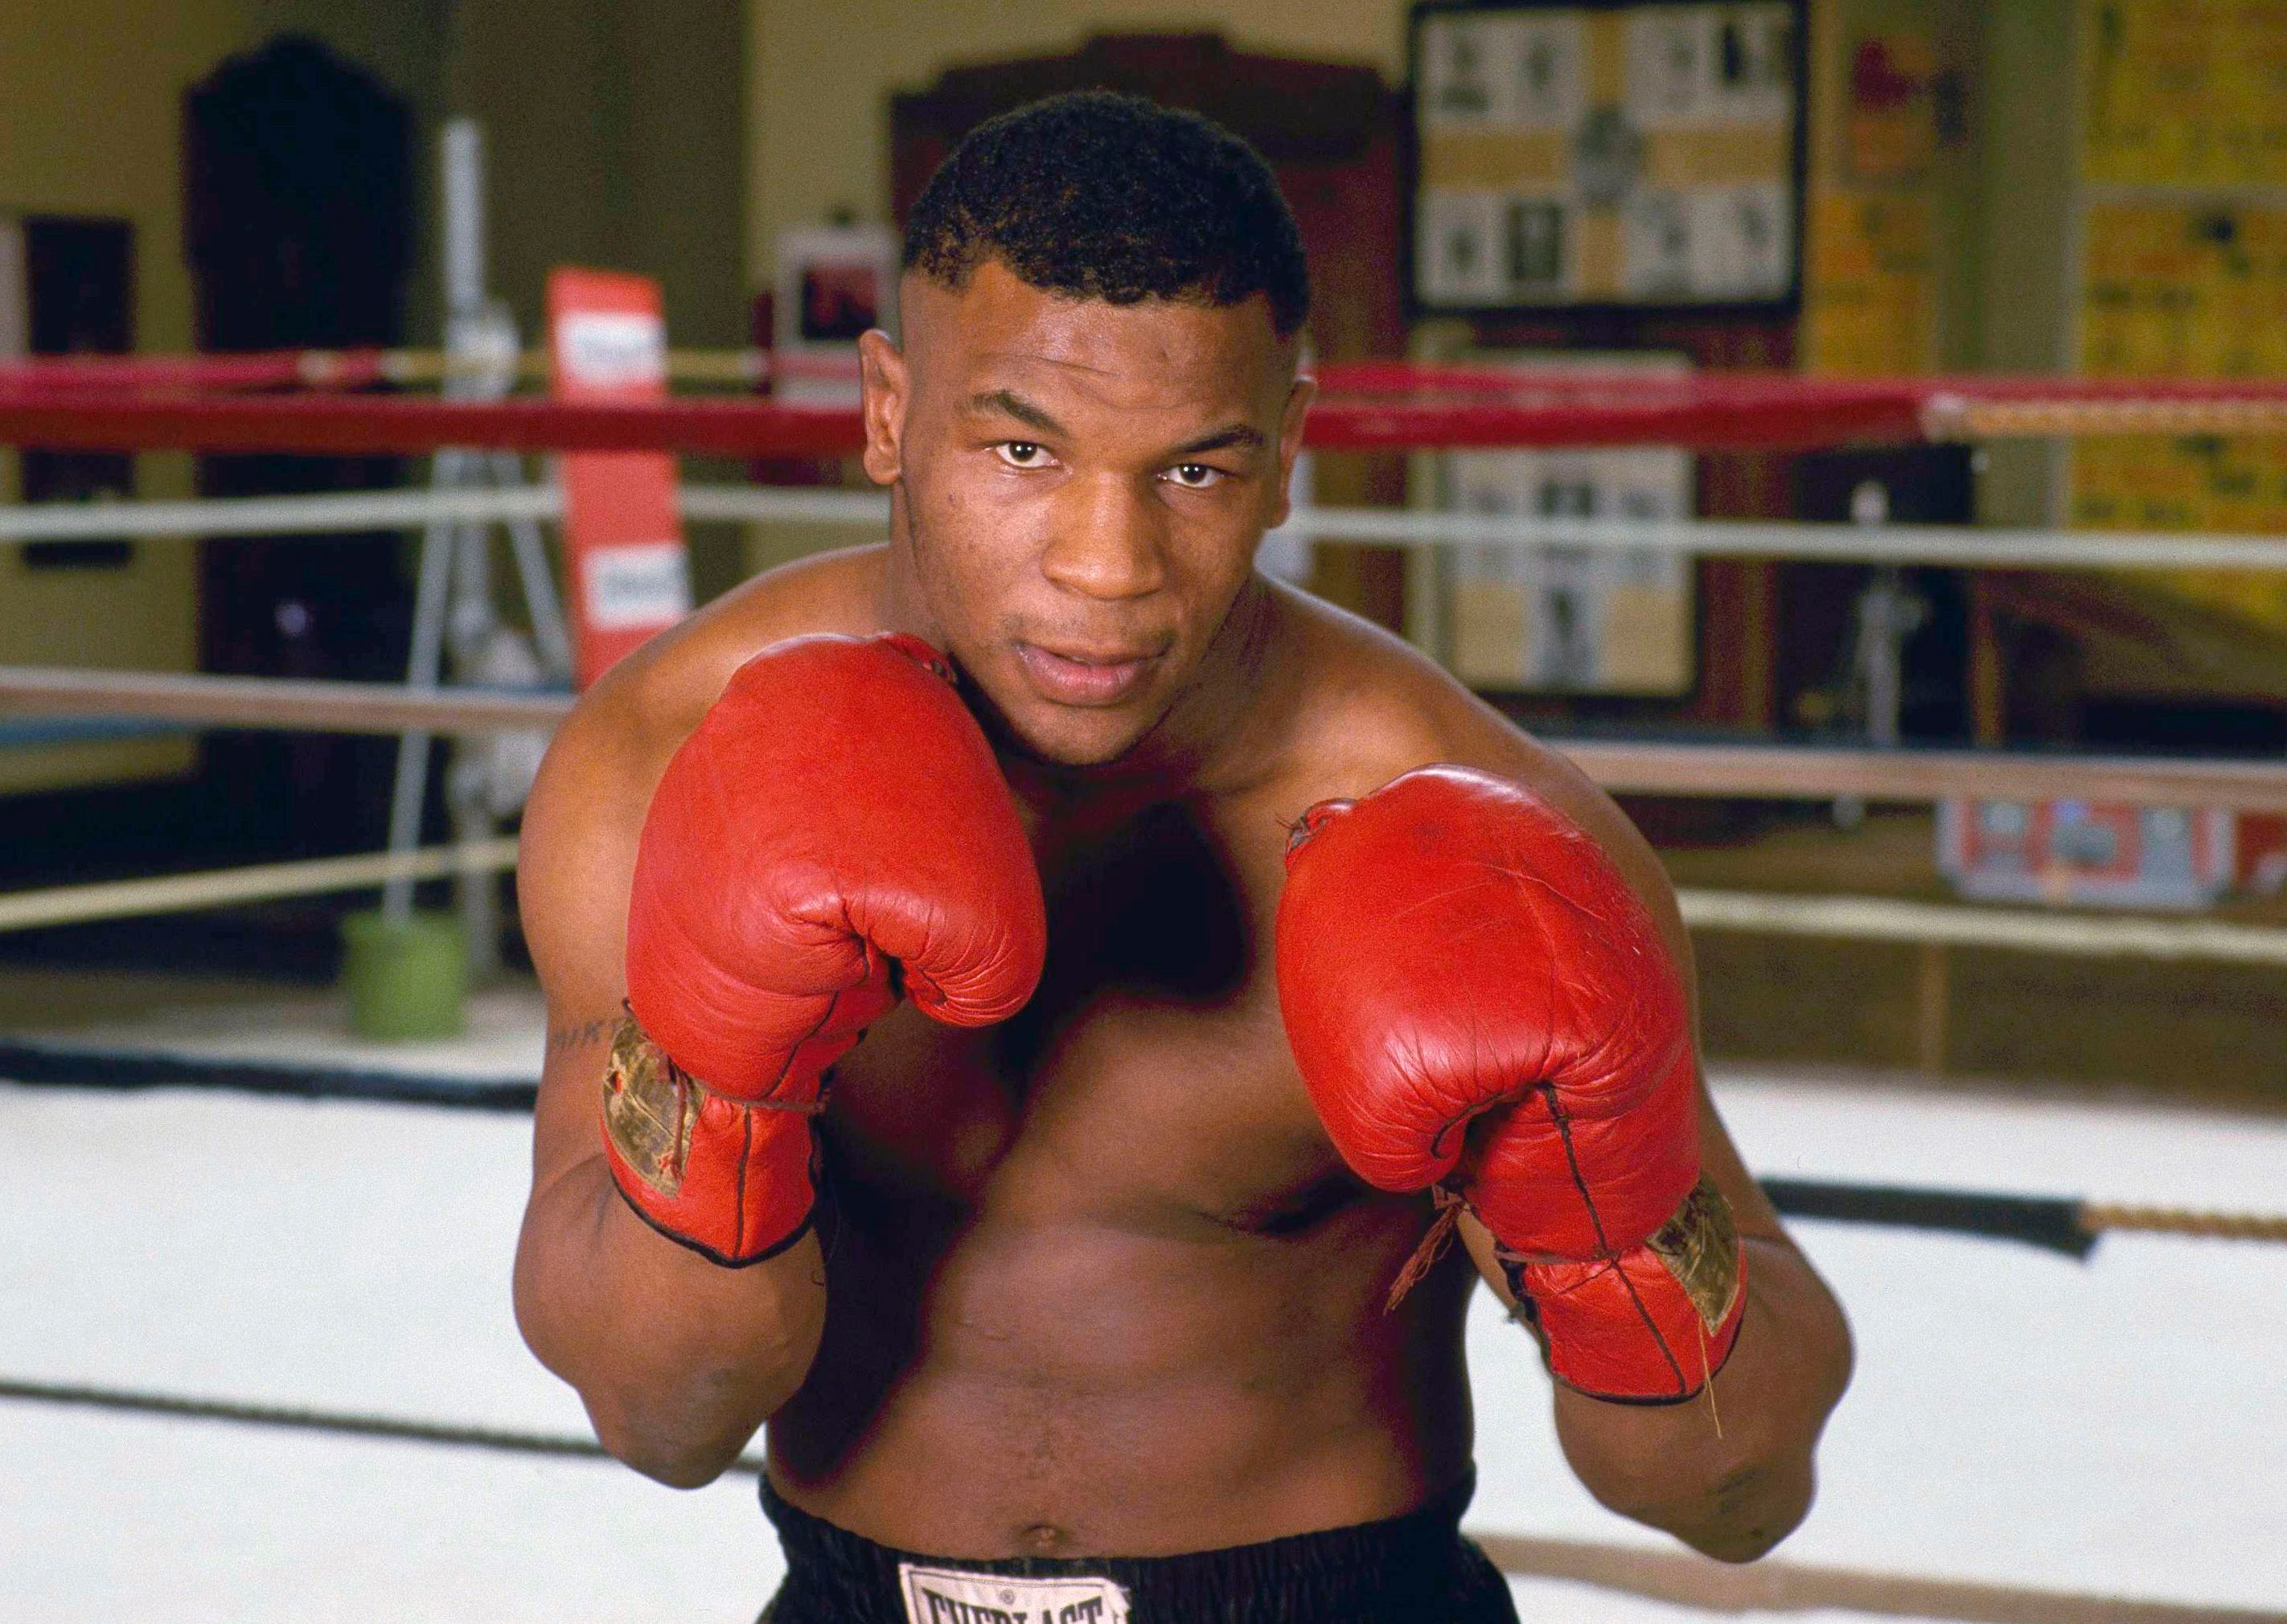 Mike Tyson's incredibly controversial life and career in photos | Gallery | Wonderwall.com